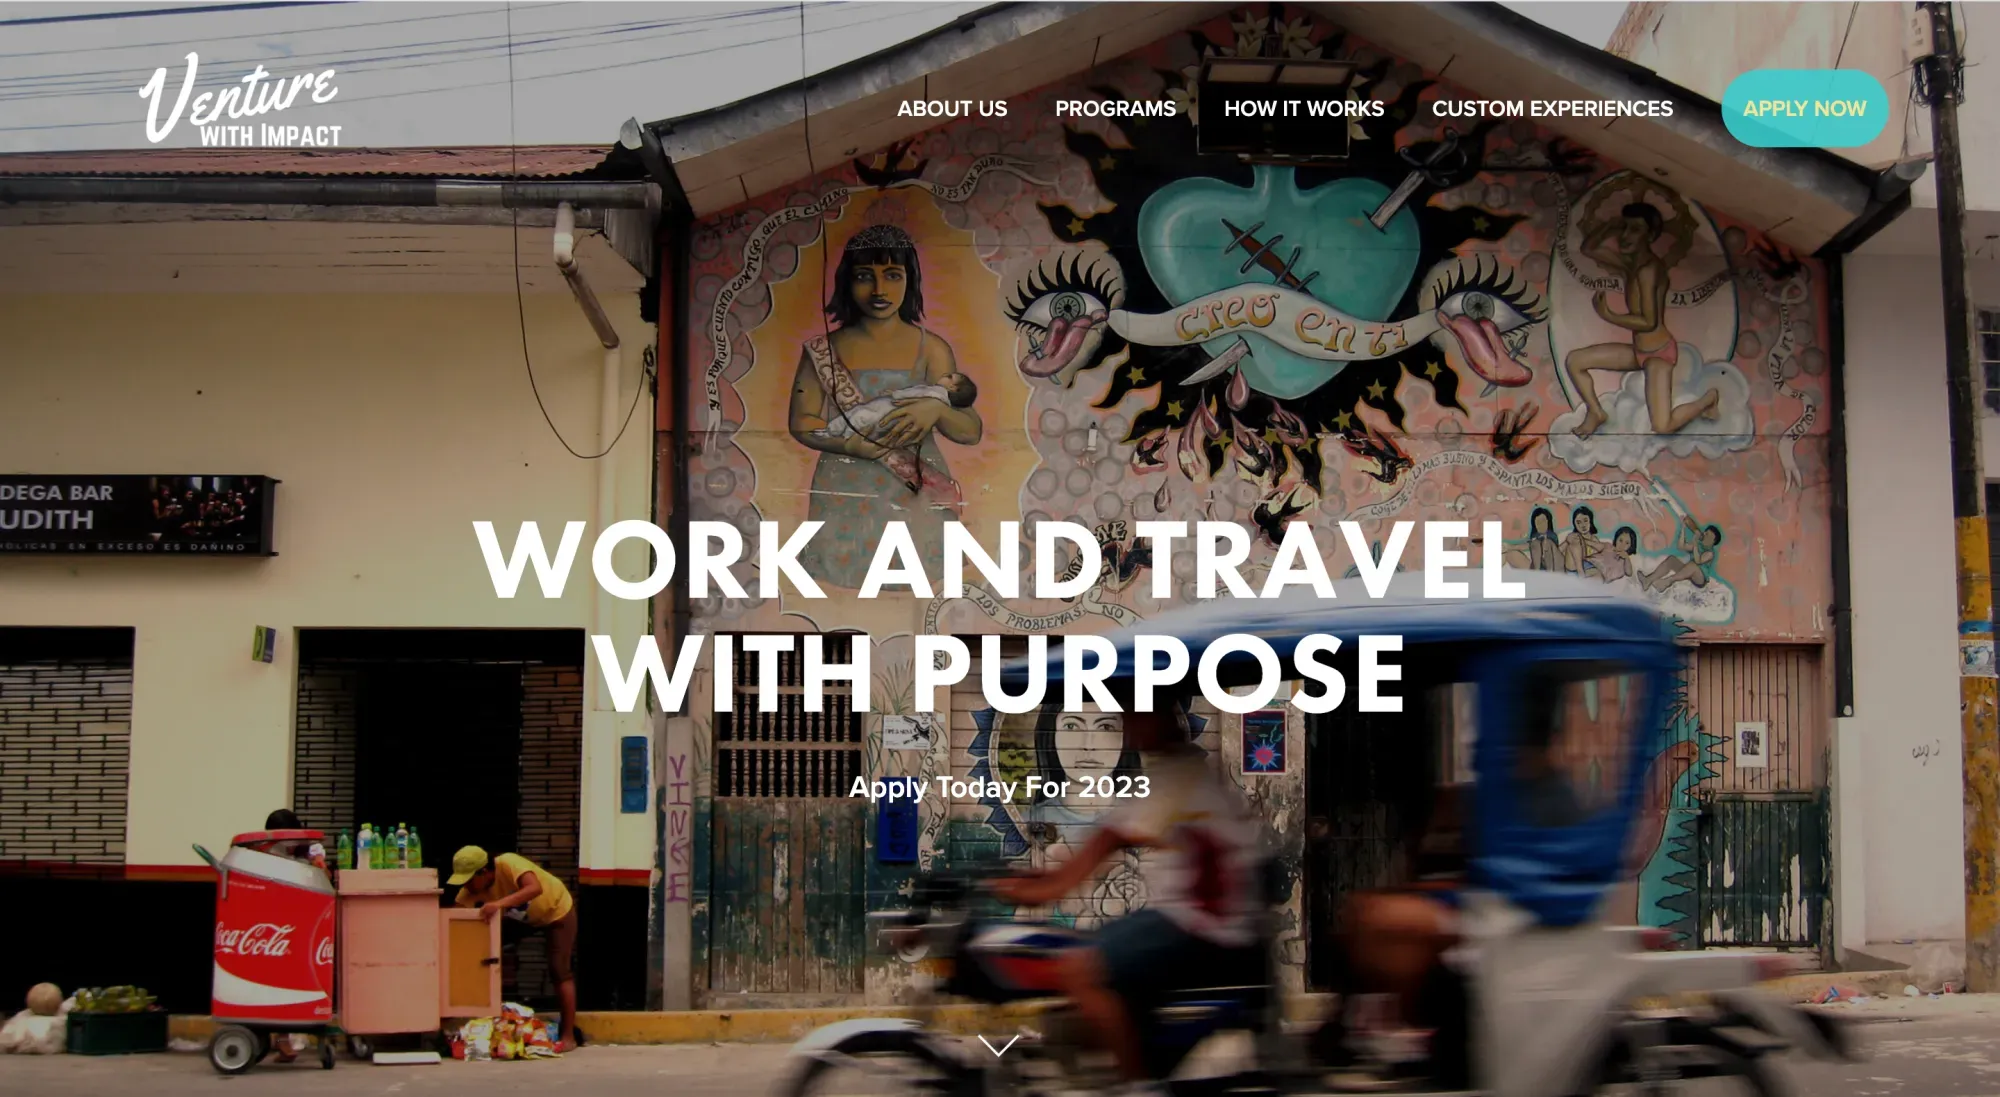 venture with impact, a website for remote work travel programs